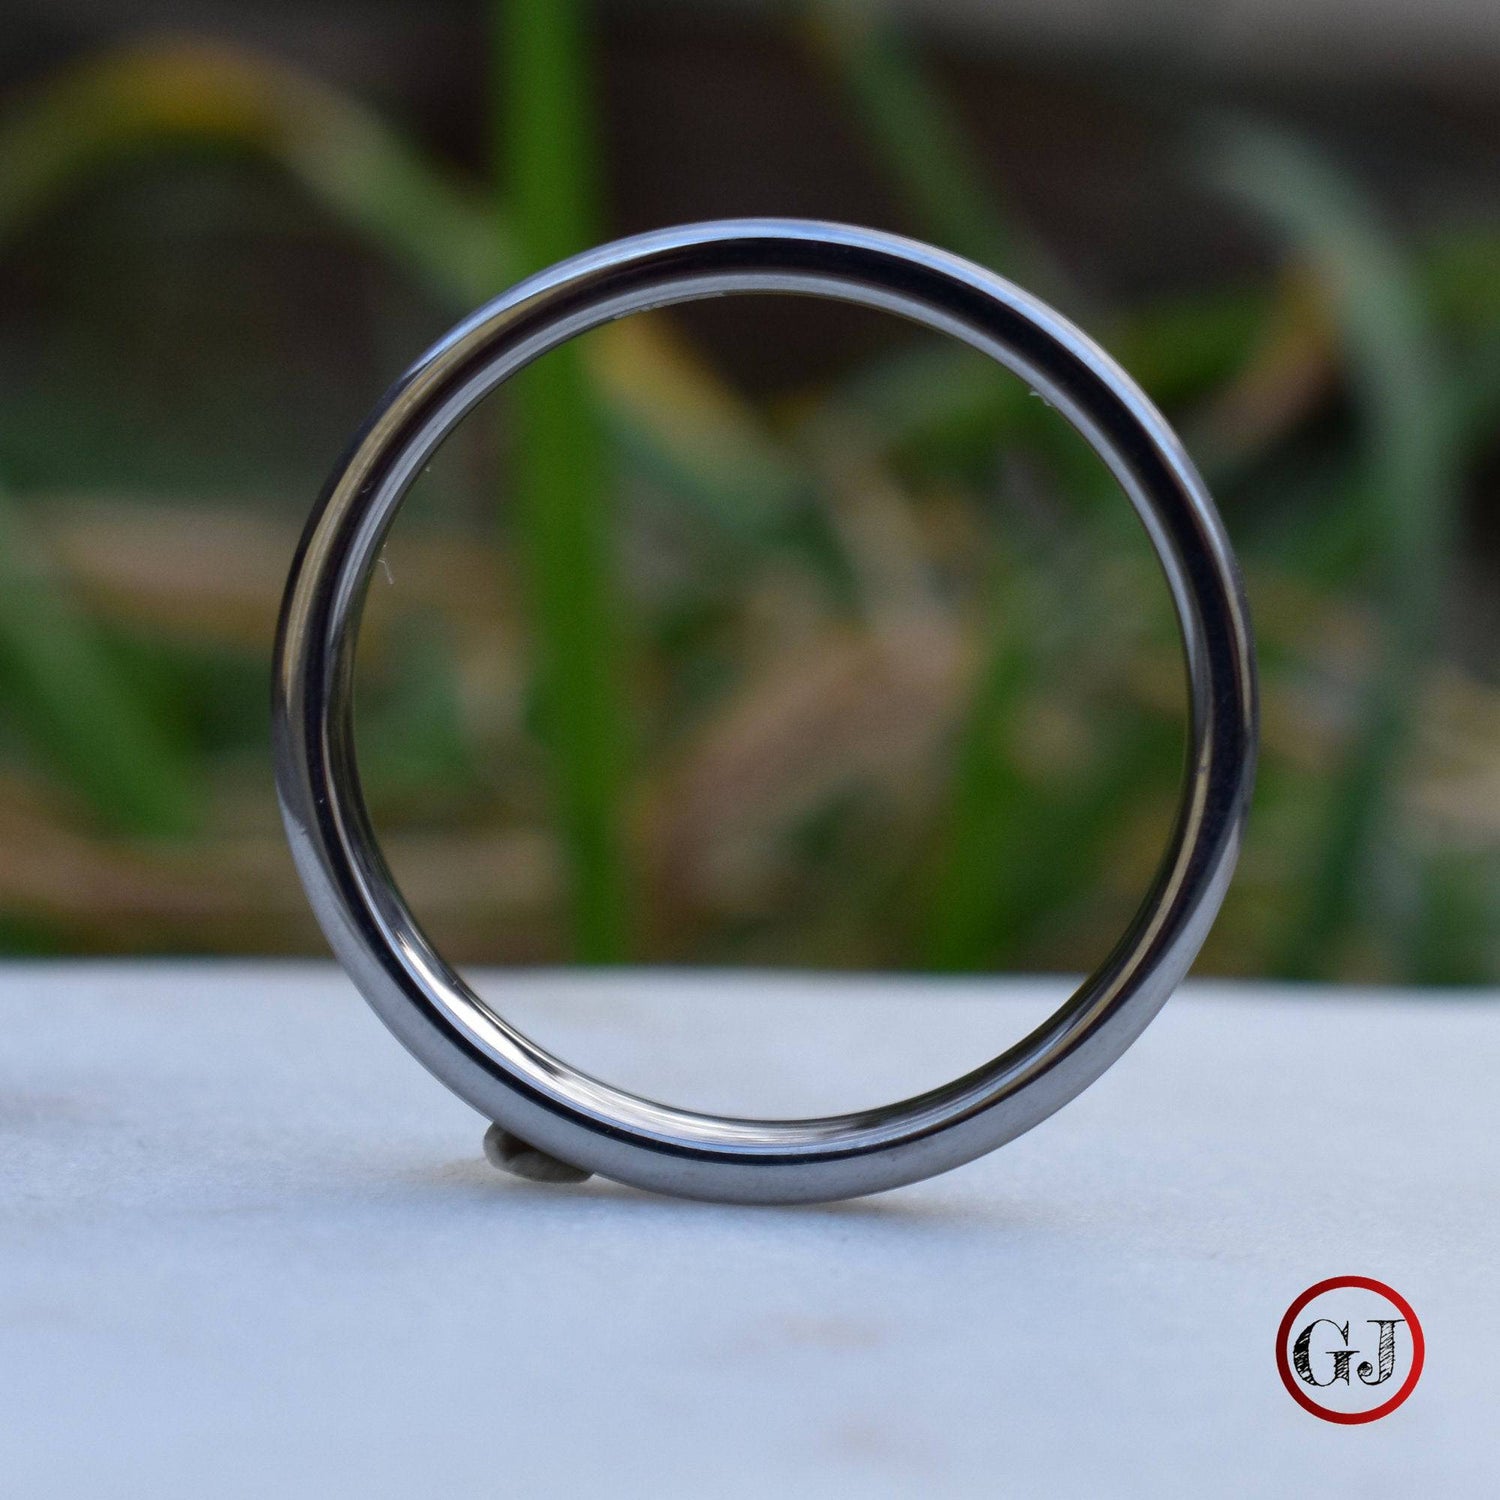 Tungsten Ring 4mm Brushed Silver Comfort fit band - Tungsten Titans